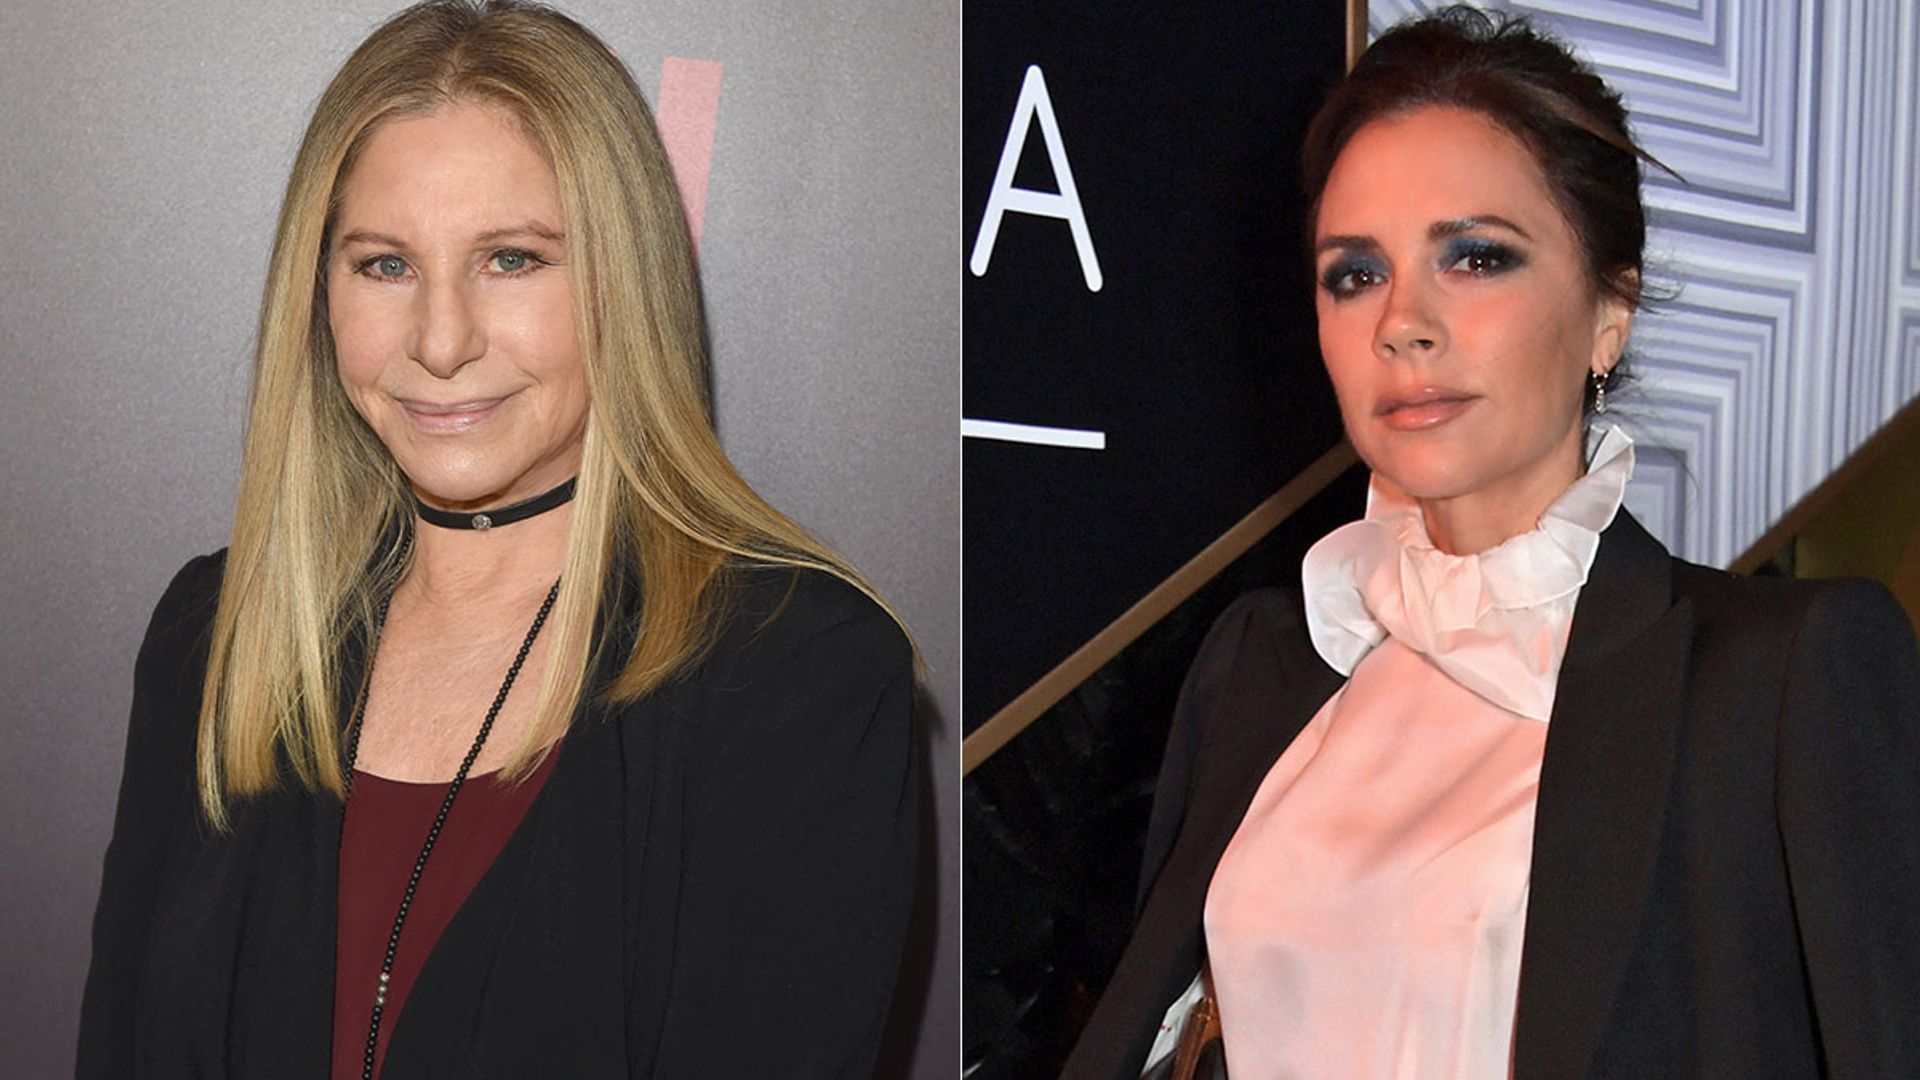 Barbra Streisand responds to Victoria Beckham's hilarious video after tackling her song